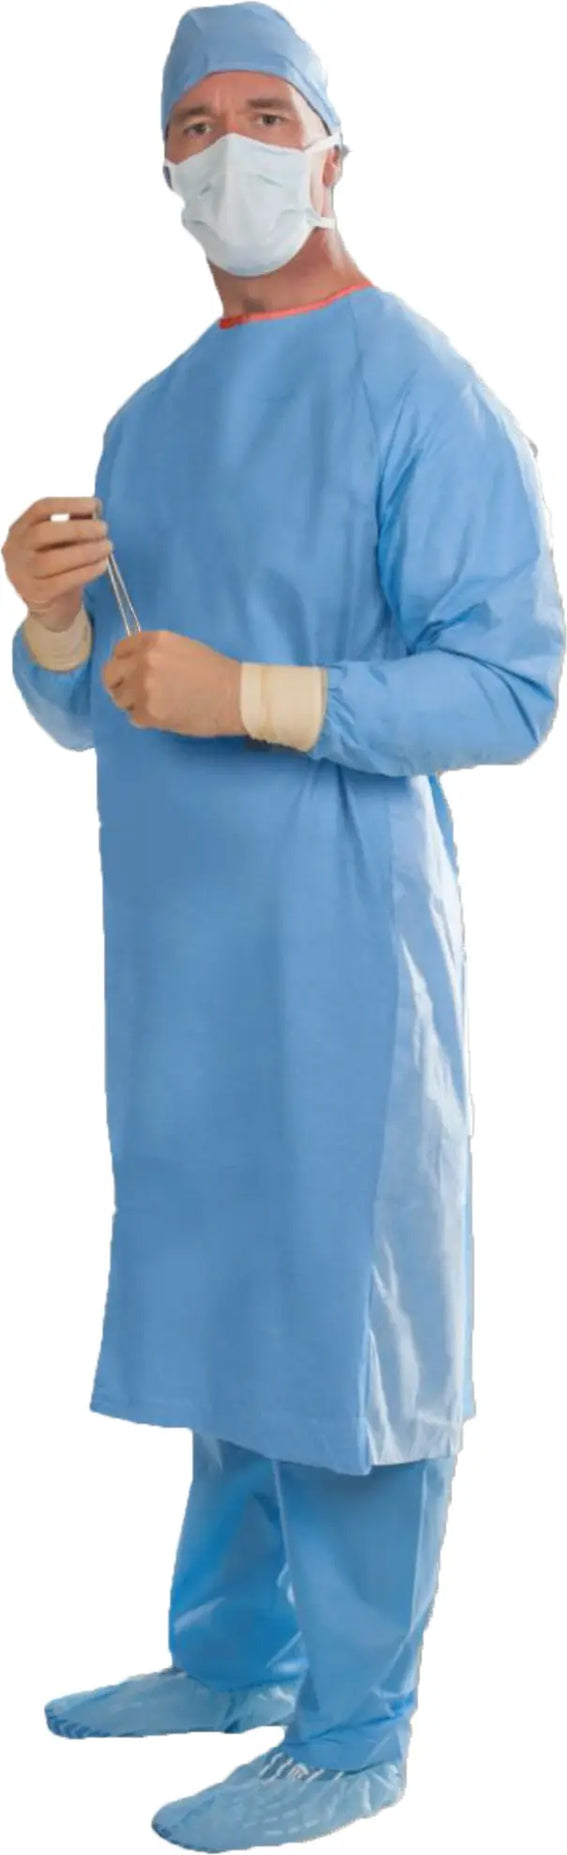 Disposable Impervious Nonsurgical Isolation Gowns - AAMI Level 4 - Knitted Cuffs